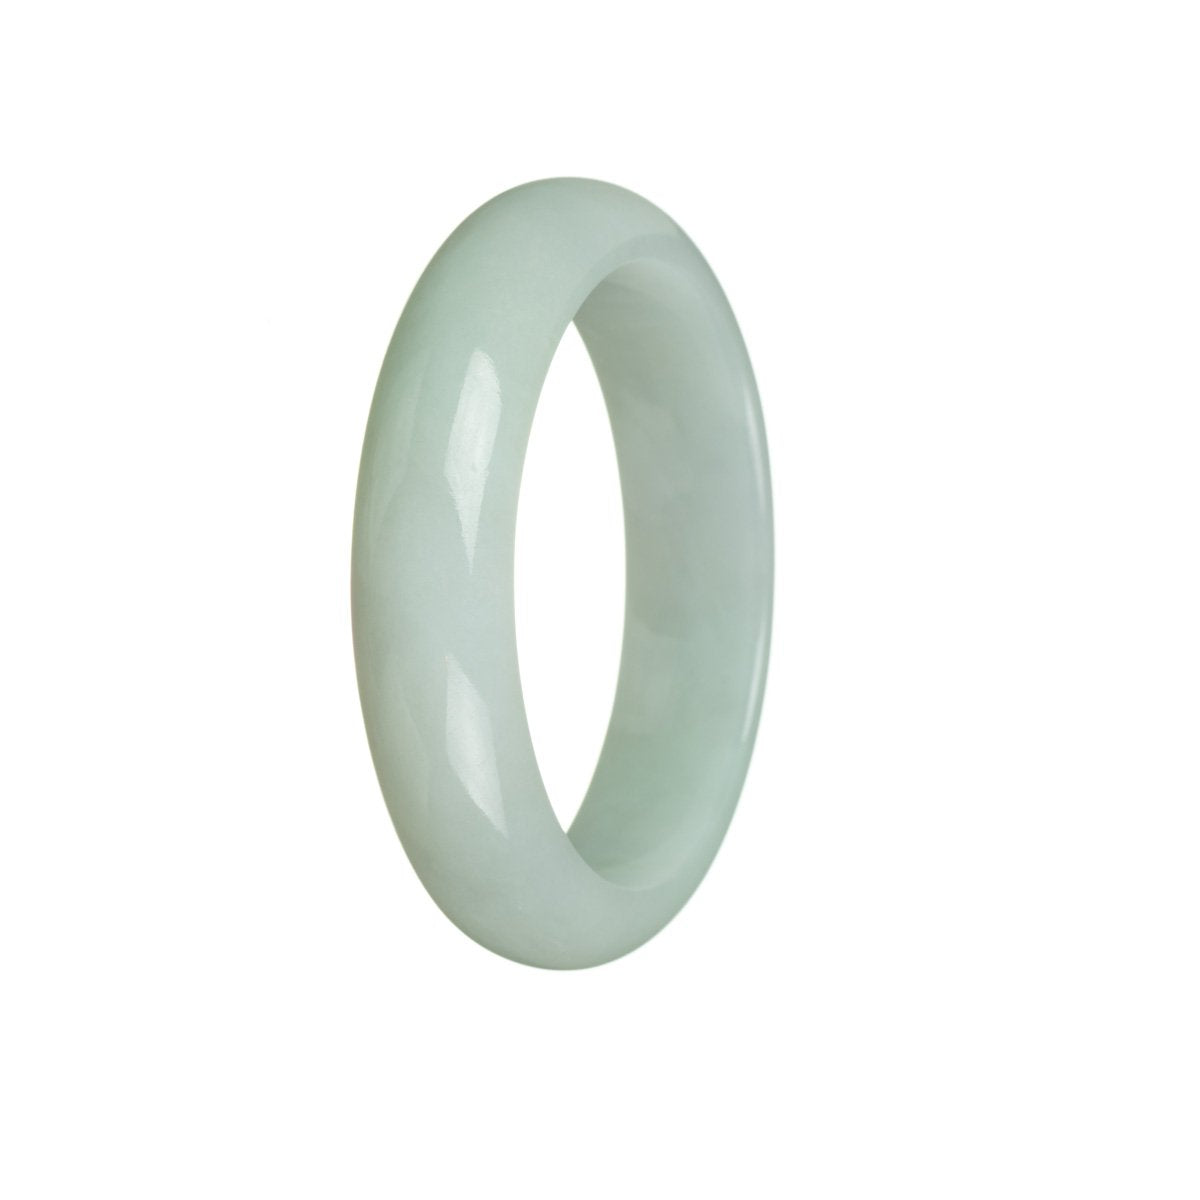 A close-up photo of a pale green jade bracelet with a half-moon shape. The bracelet is made of genuine Type A Burmese jade and measures 54mm in size. It is a beautiful piece of jewelry from MAYS GEMS.